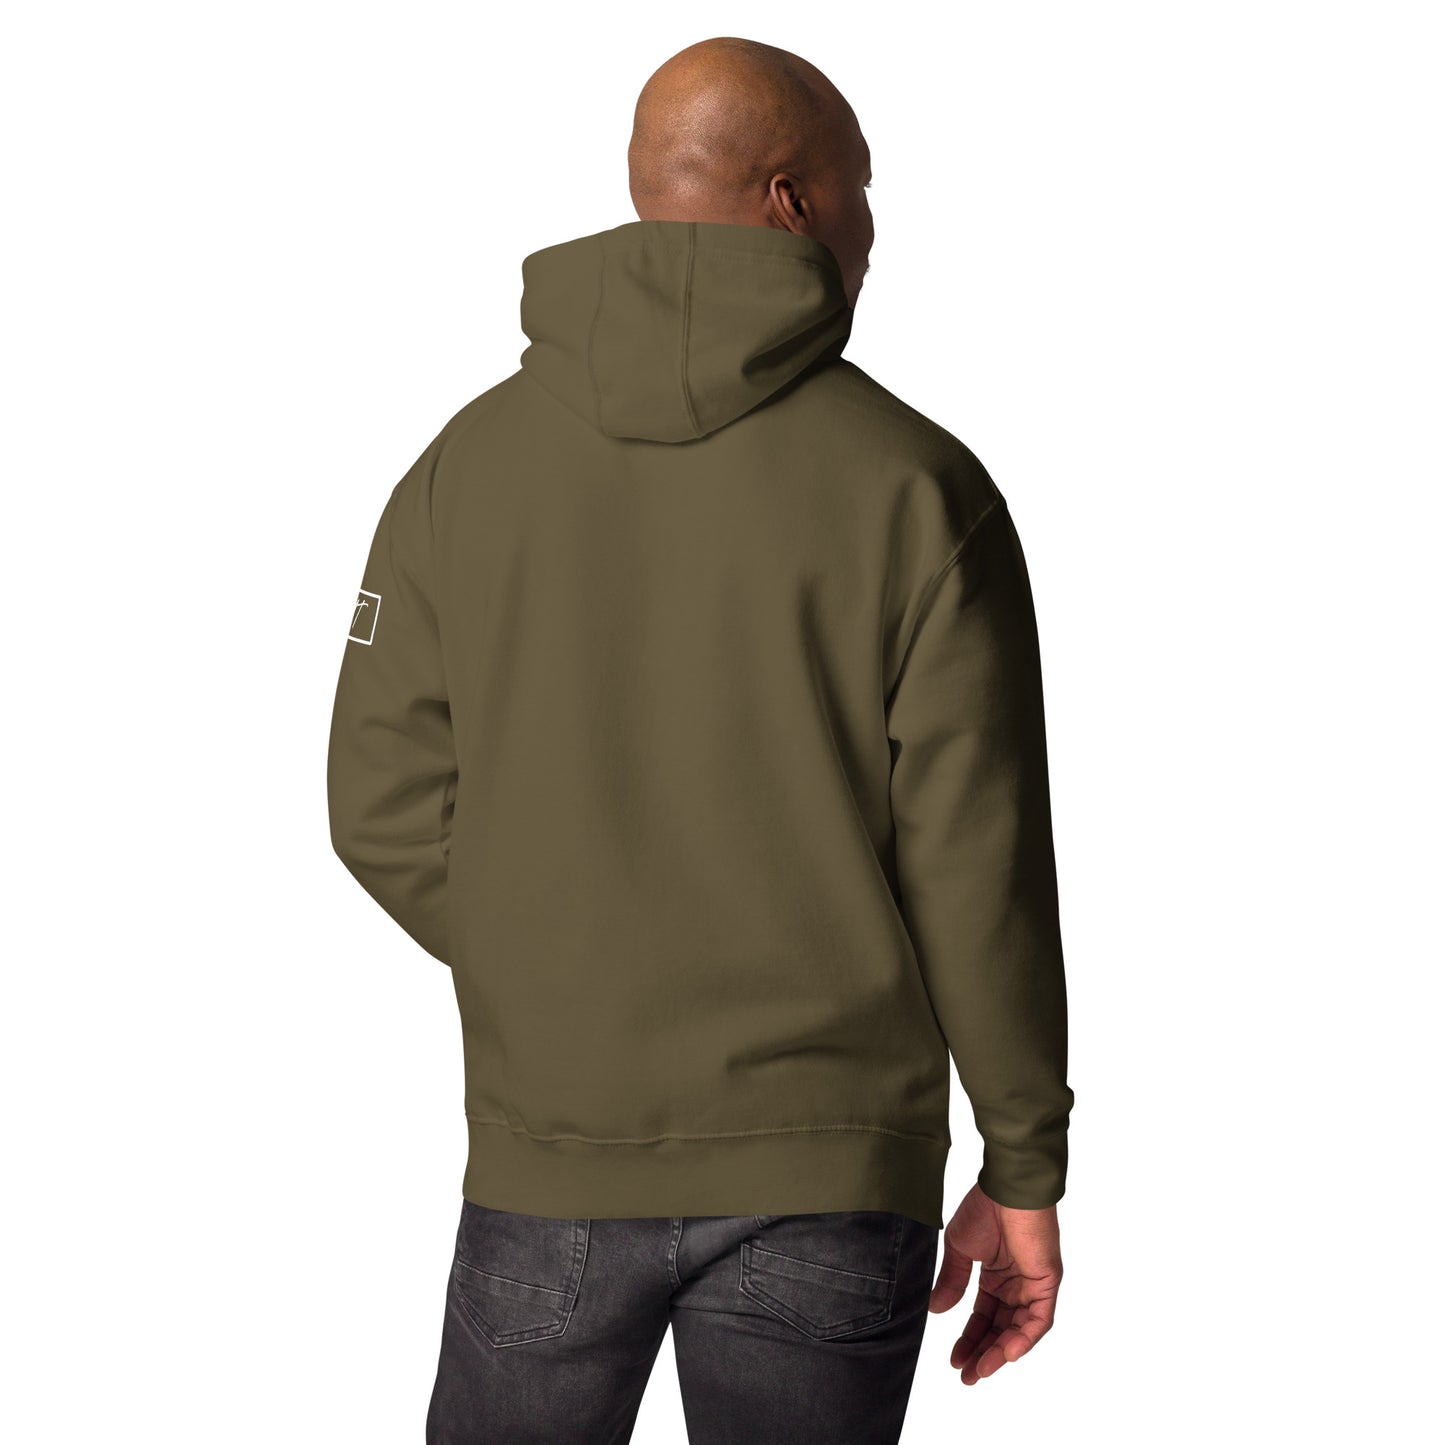 Back-Side view of Avalanche Lake in Glacier National Park Montana Military Green Hoodies for Men from Park Attire